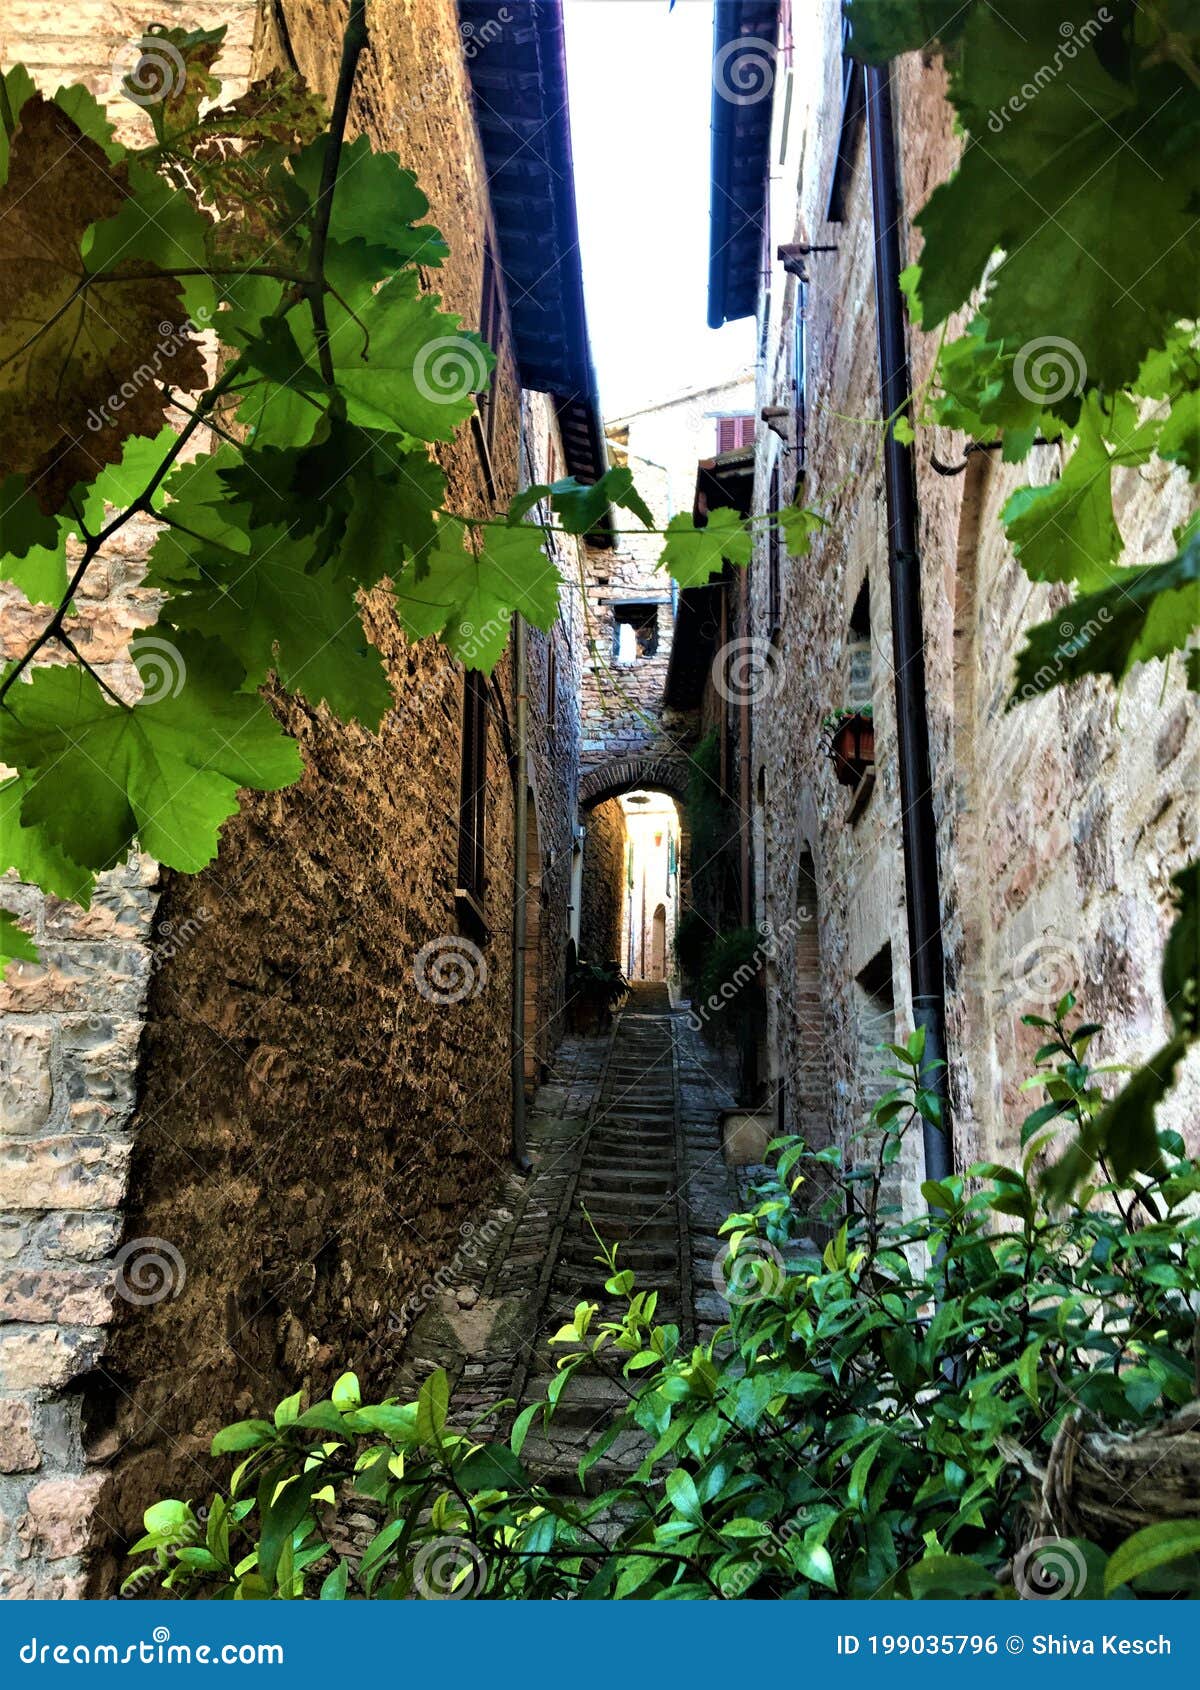 spello town in umbria region, italy. splendour, time, history and tourism